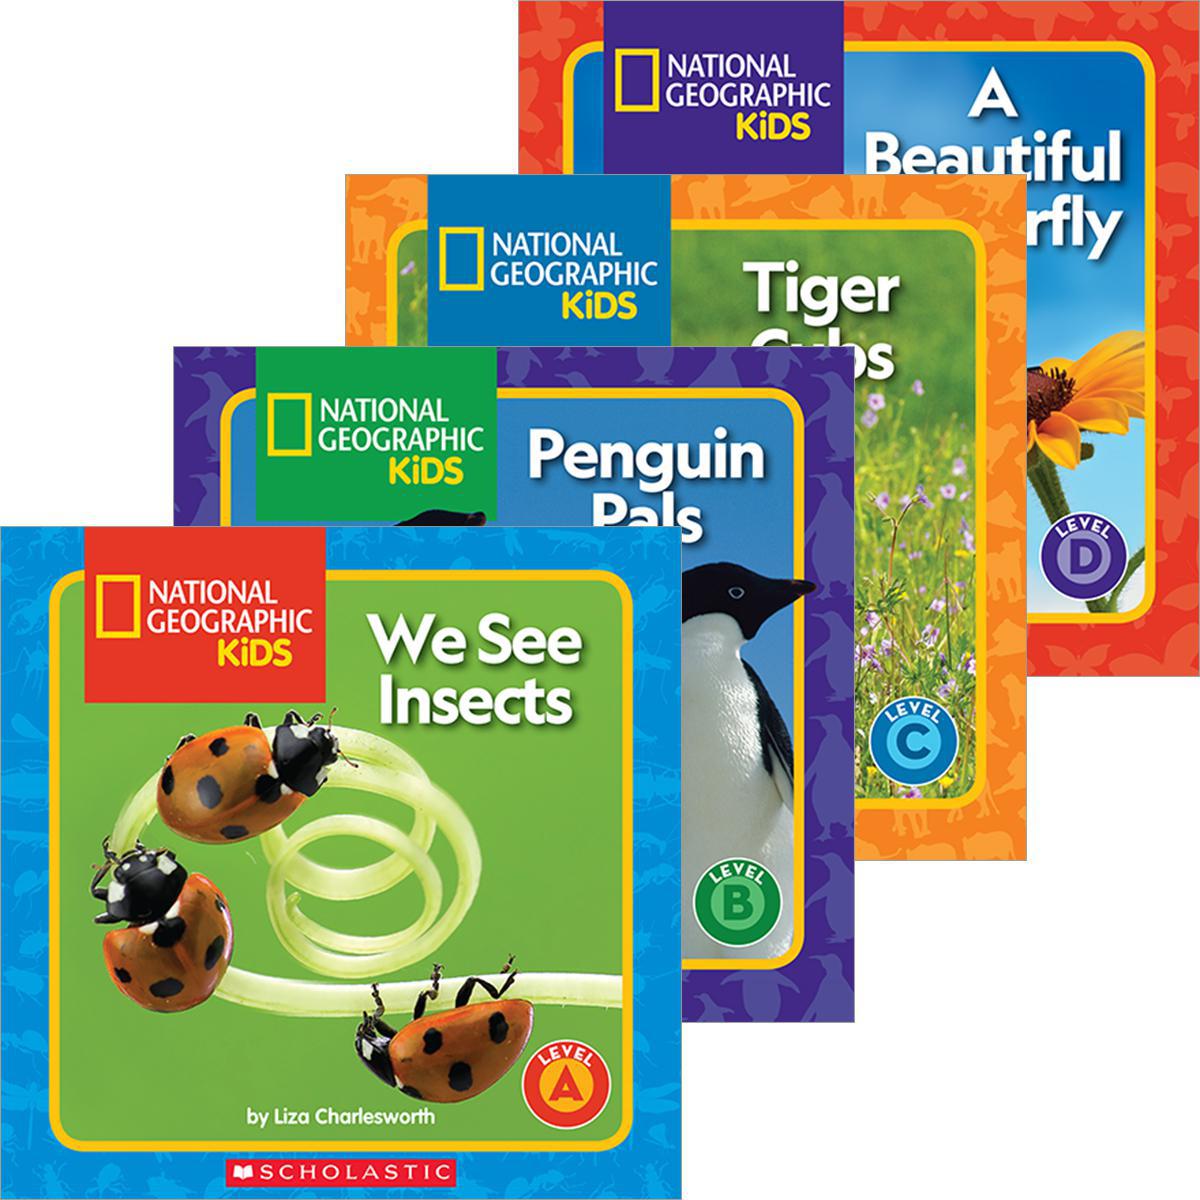  National Geographic Kids: Guided Reader Pack (A-D) 